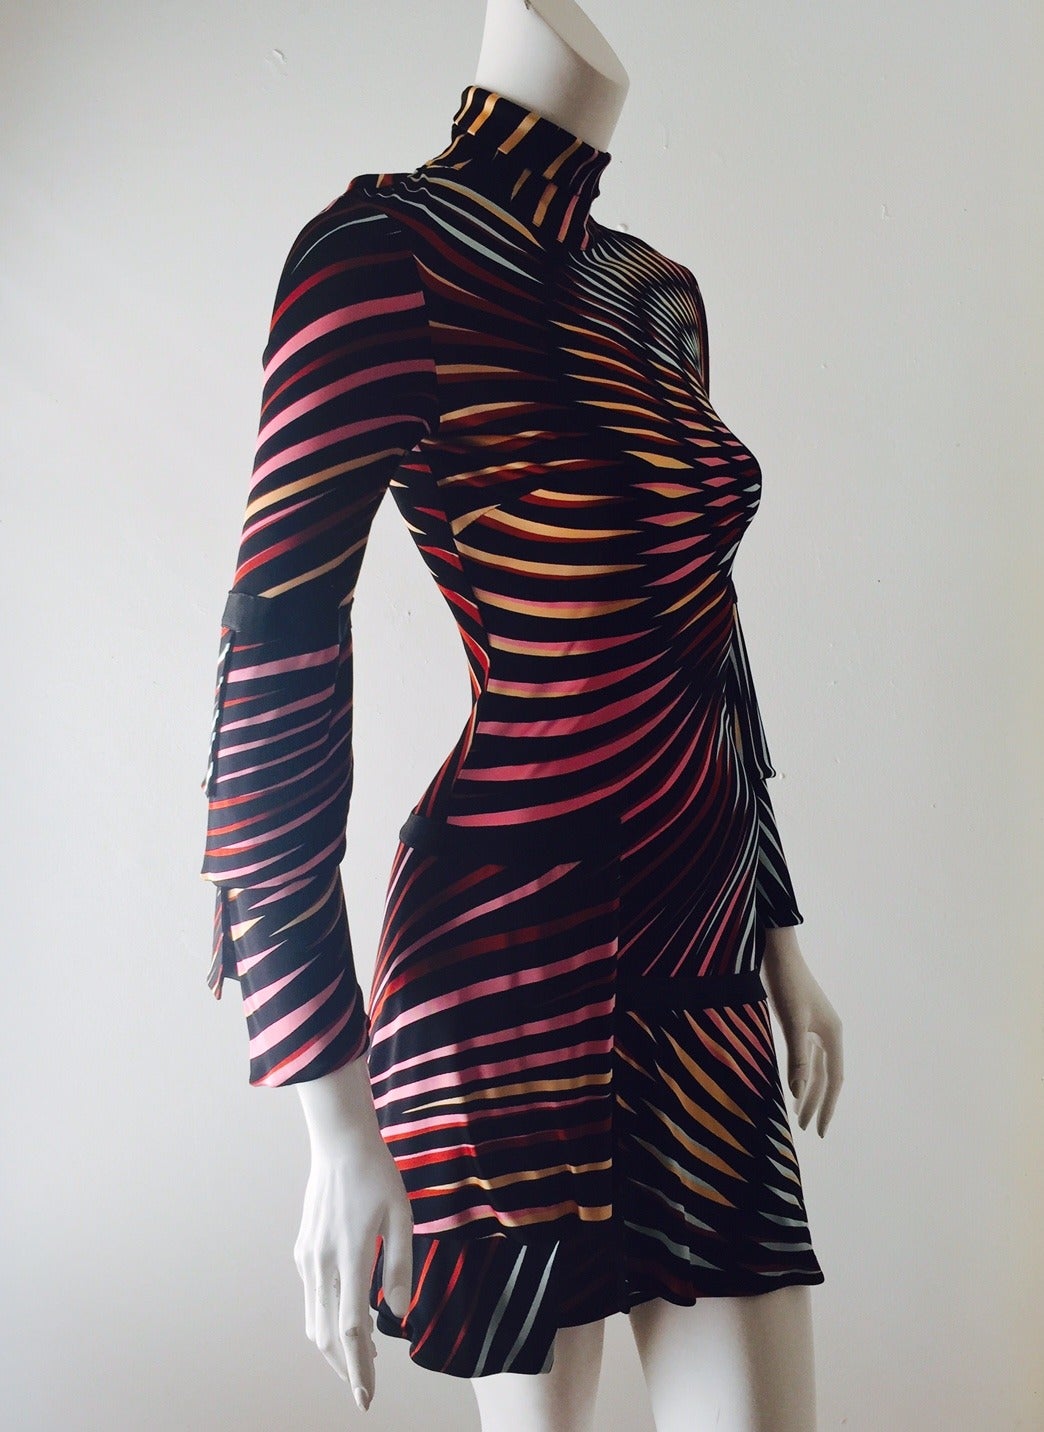 Print Turtleneck Long Dress is undeniably Missoni!  Advanced techniques abound...vibrant kaleidoscope print and flattering bias cut will garner praise from all admirers.  Solid black ribbon detail decorates the tiered, asymmetric bell sleeves and